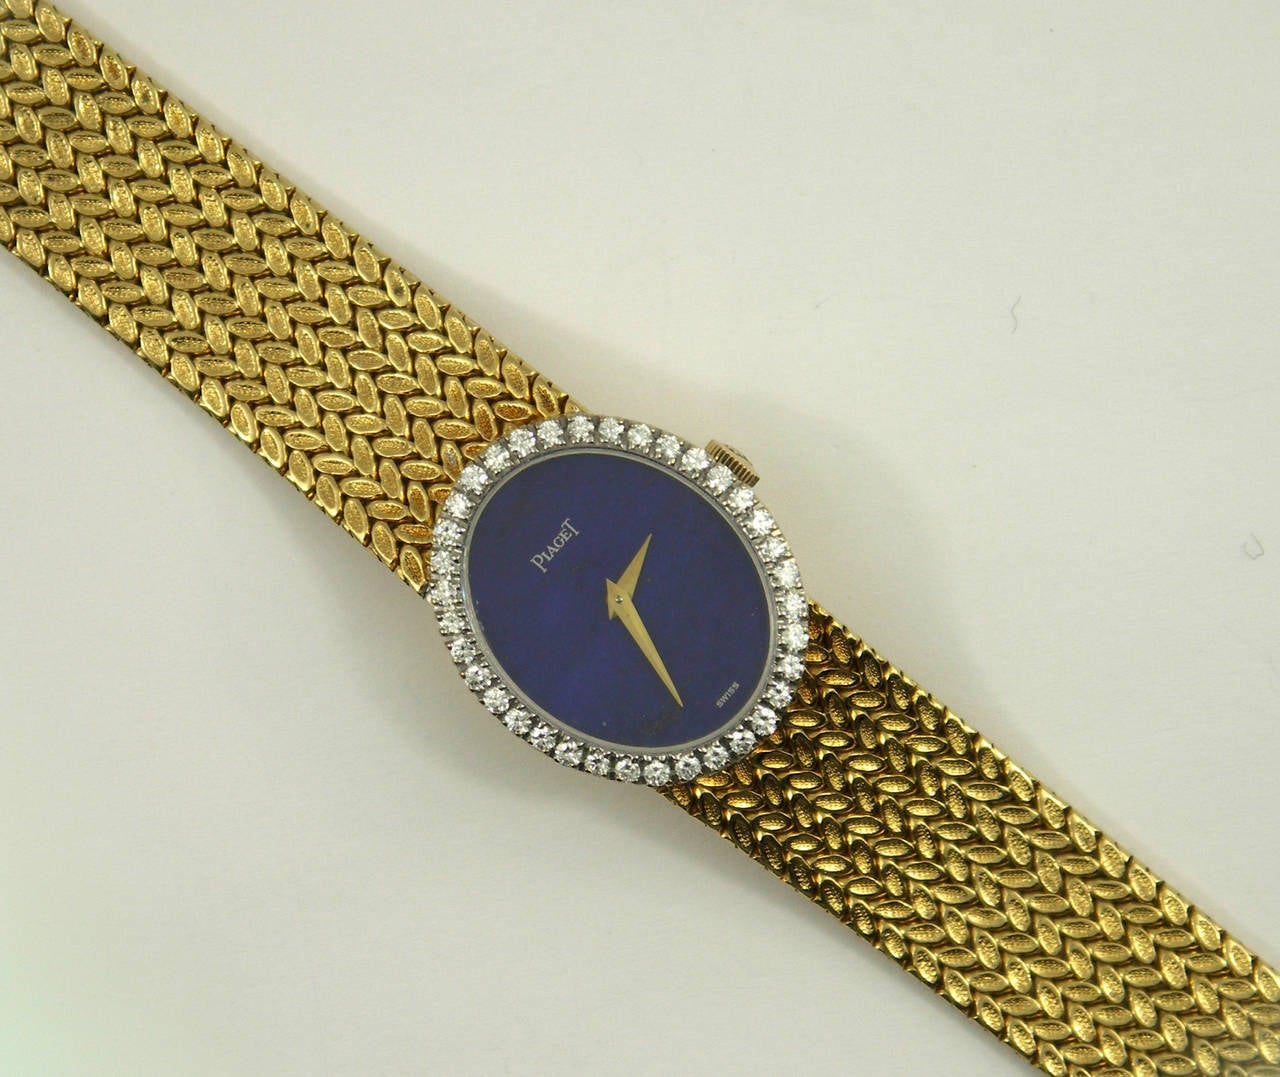 One ladies 18K yellow gold Piaget wristwatch, complete with Lapis Lazuli dial and diamond bezel. The case measures 2m long and 22mm wide, and is set with approximately 1ct of F/G color, and VS1 clarity diamonds. Overall length is 6 3/8 inches.